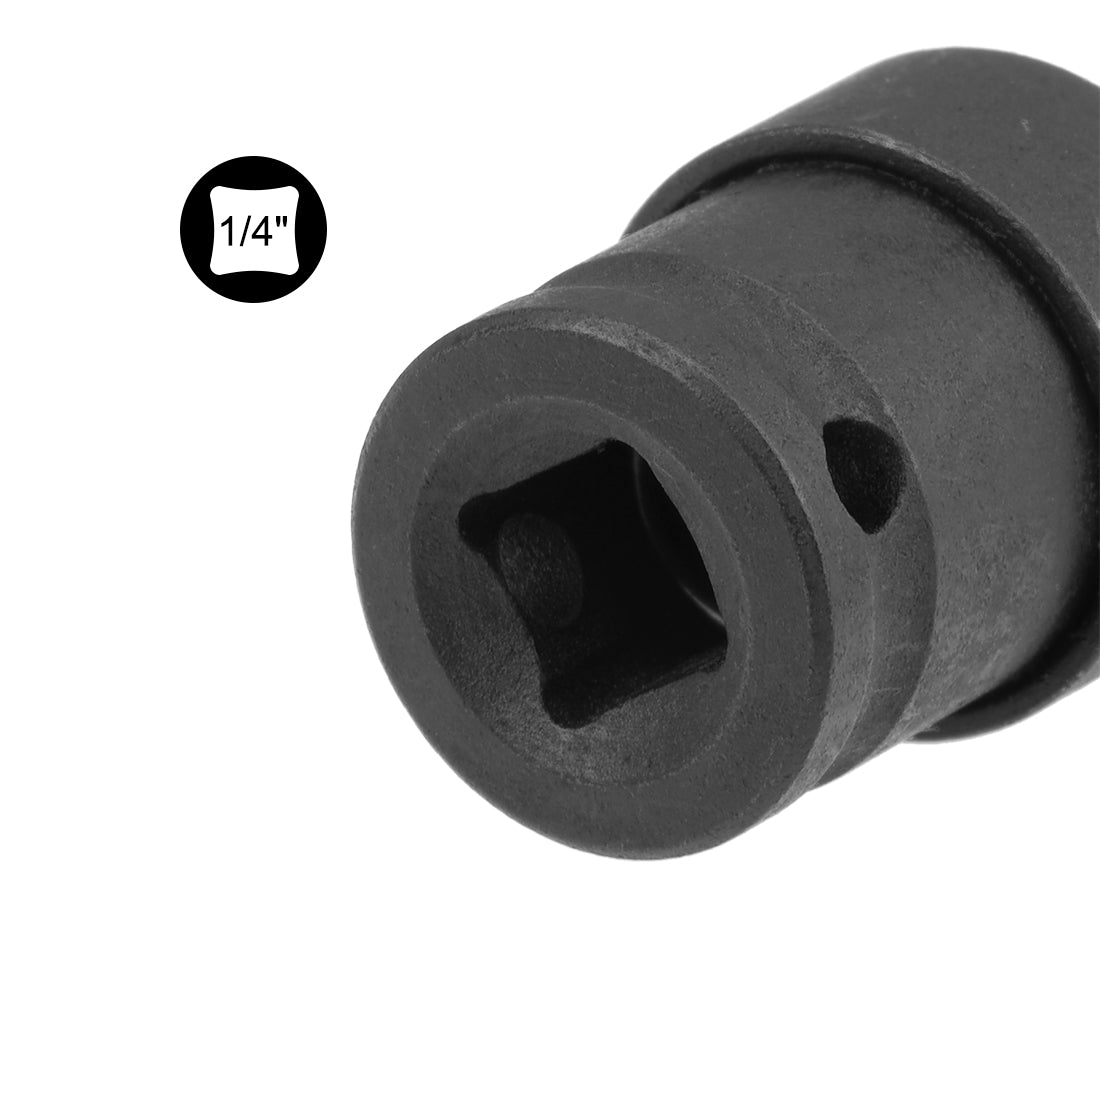 uxcell Uxcell 1/4 Inch Drive Universal Joint Impact Socket, Cr-V